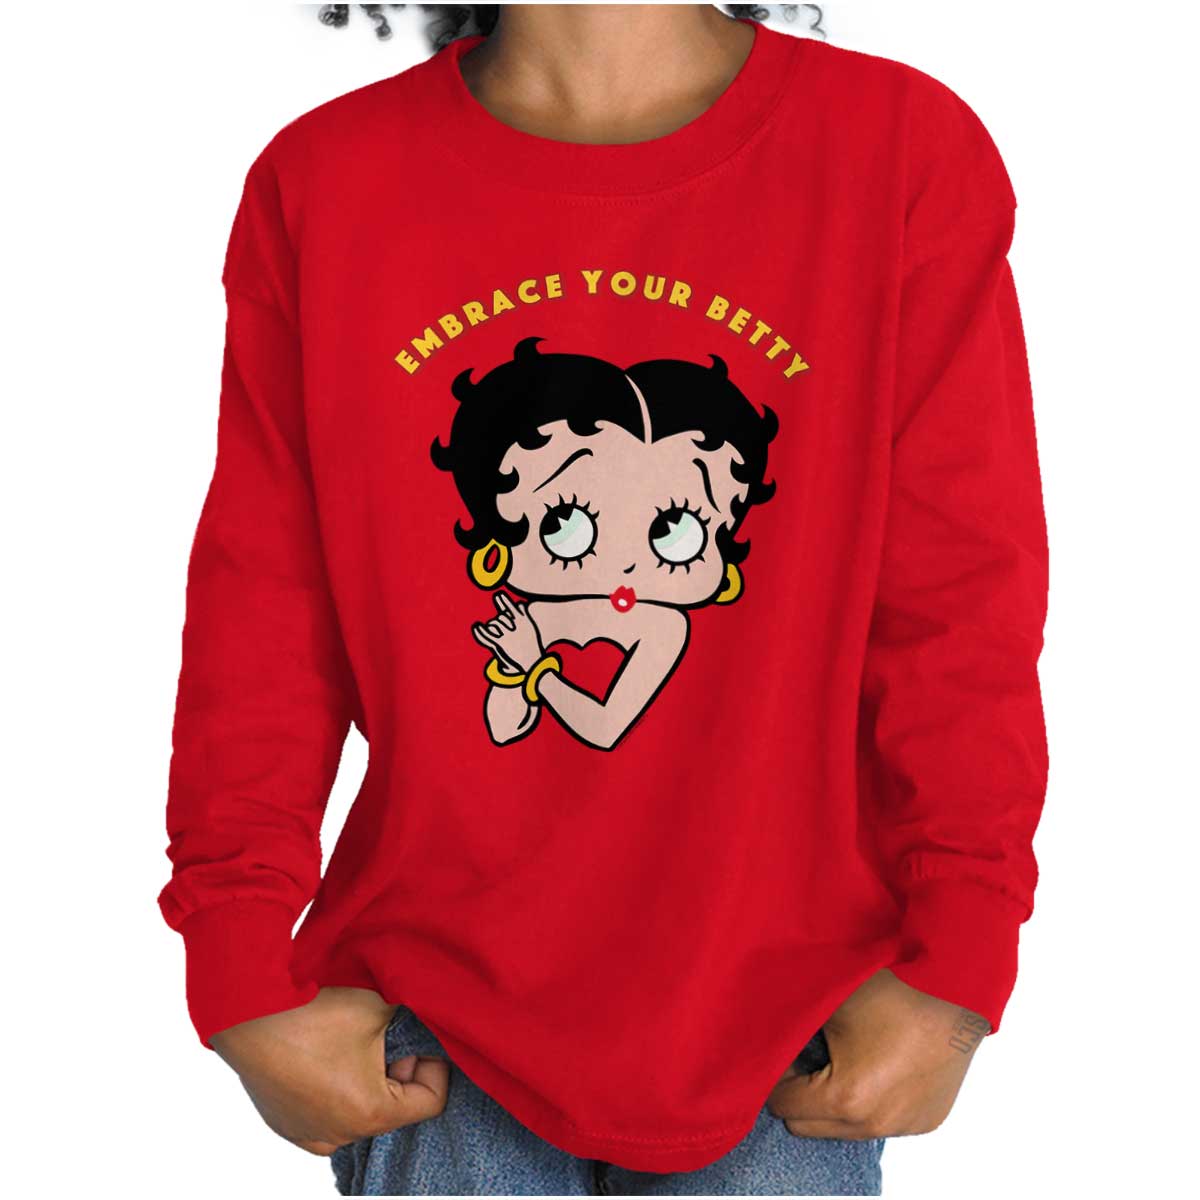 Y2K Betty Boop Graphic Tee Long Sleeve Baseball T Shirt Double Sided Henley 2000s 00s Vintage Extra Small XS